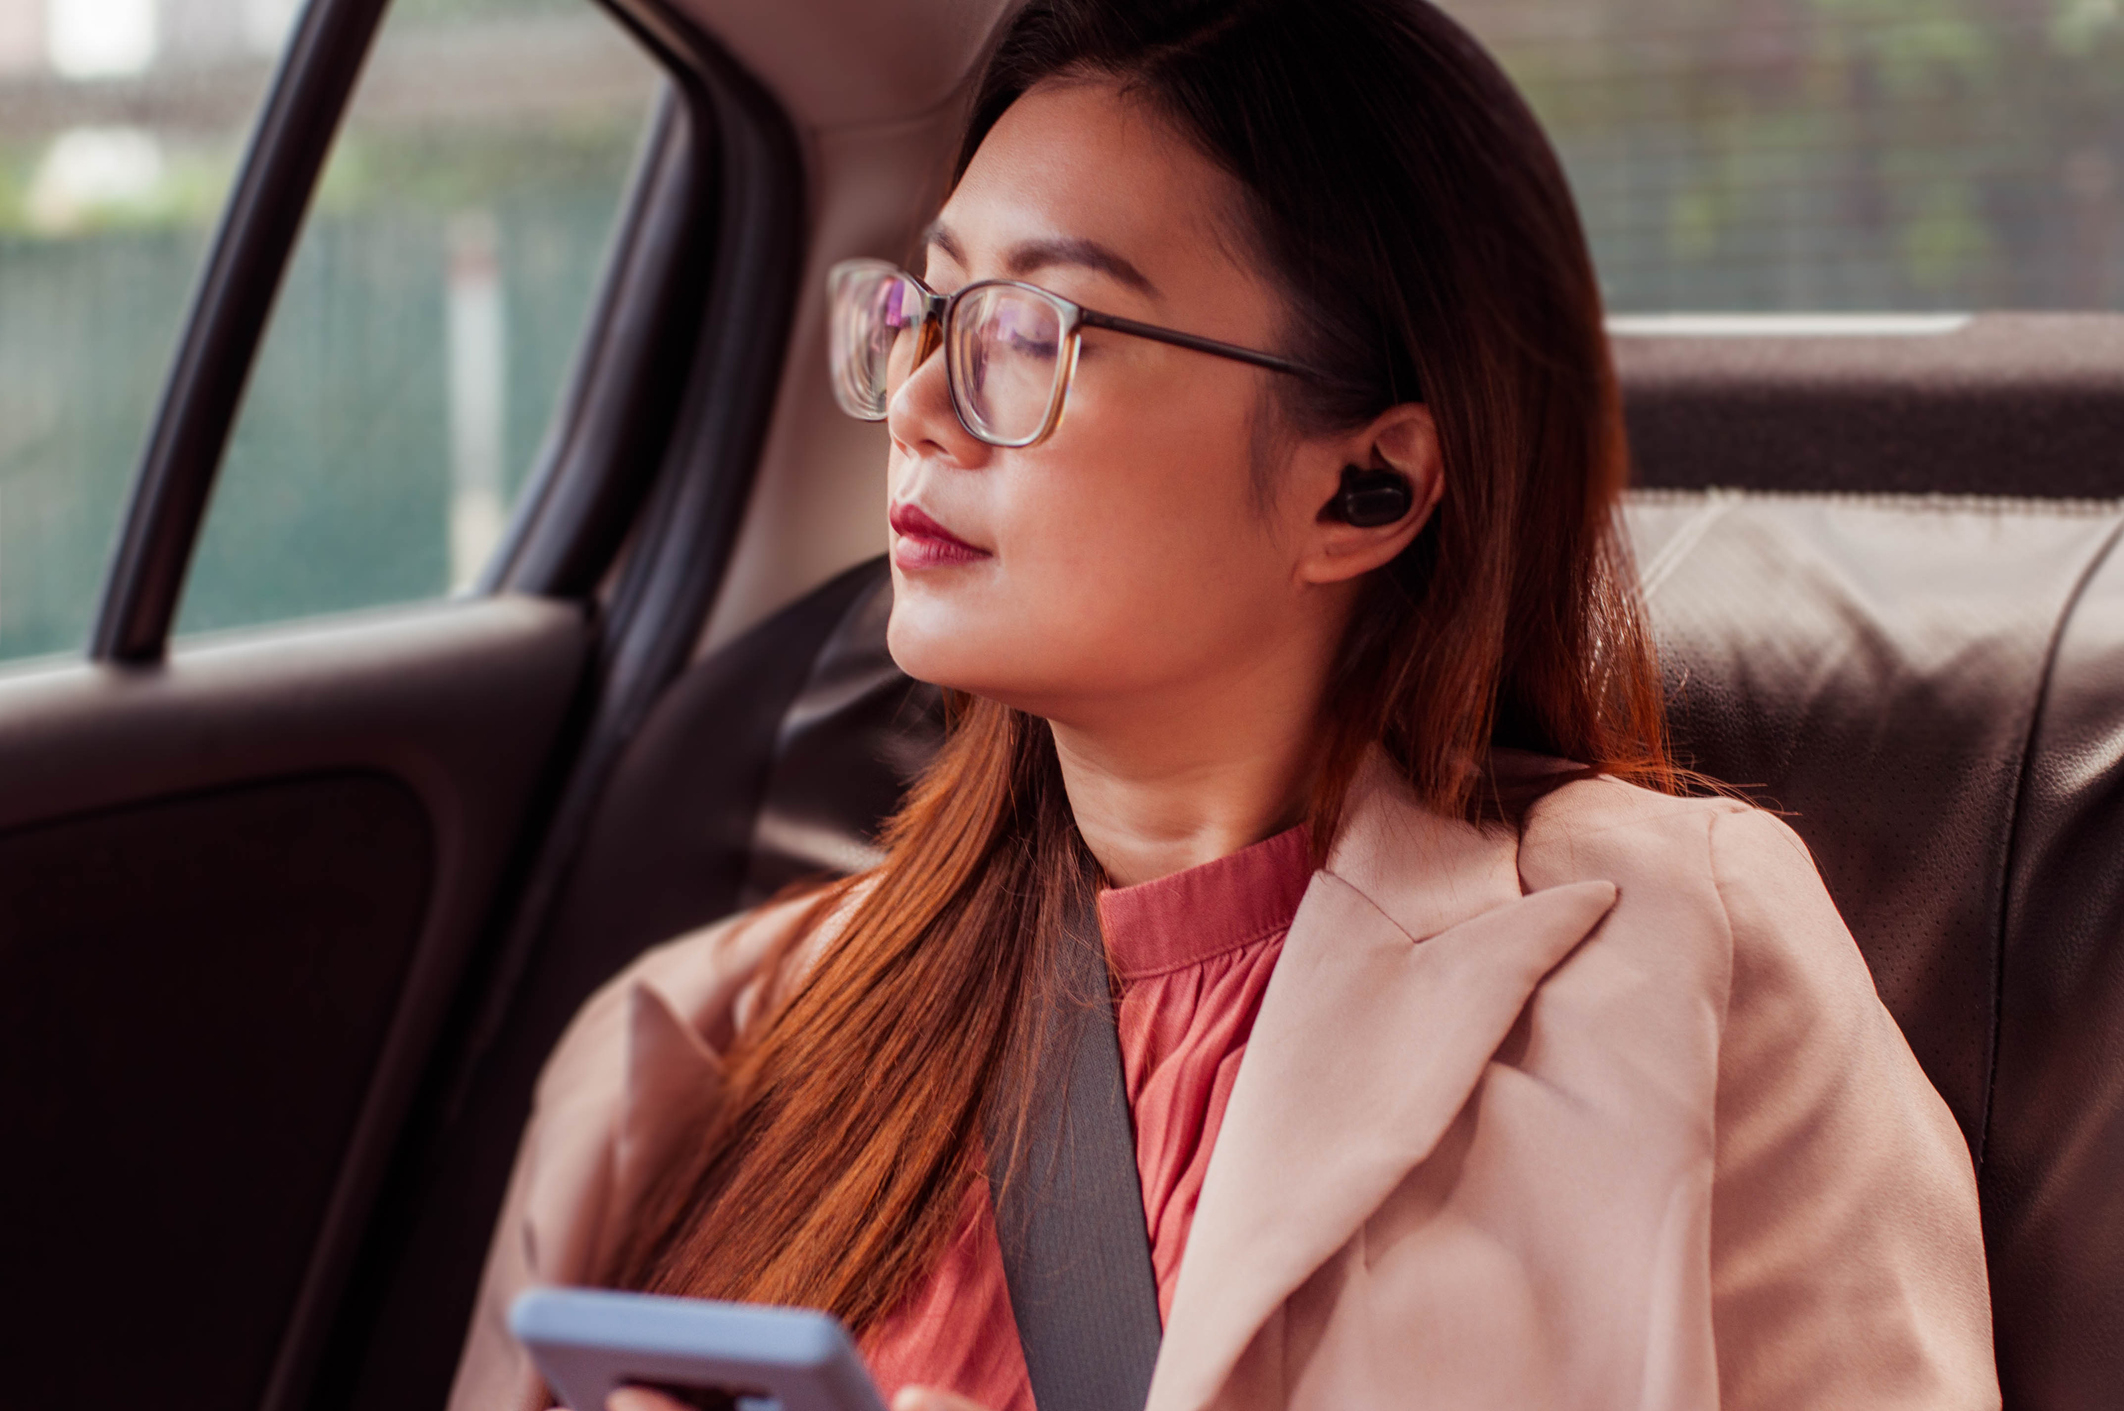 Woman with glasses in car using smartphone, dressed in a professional outfit